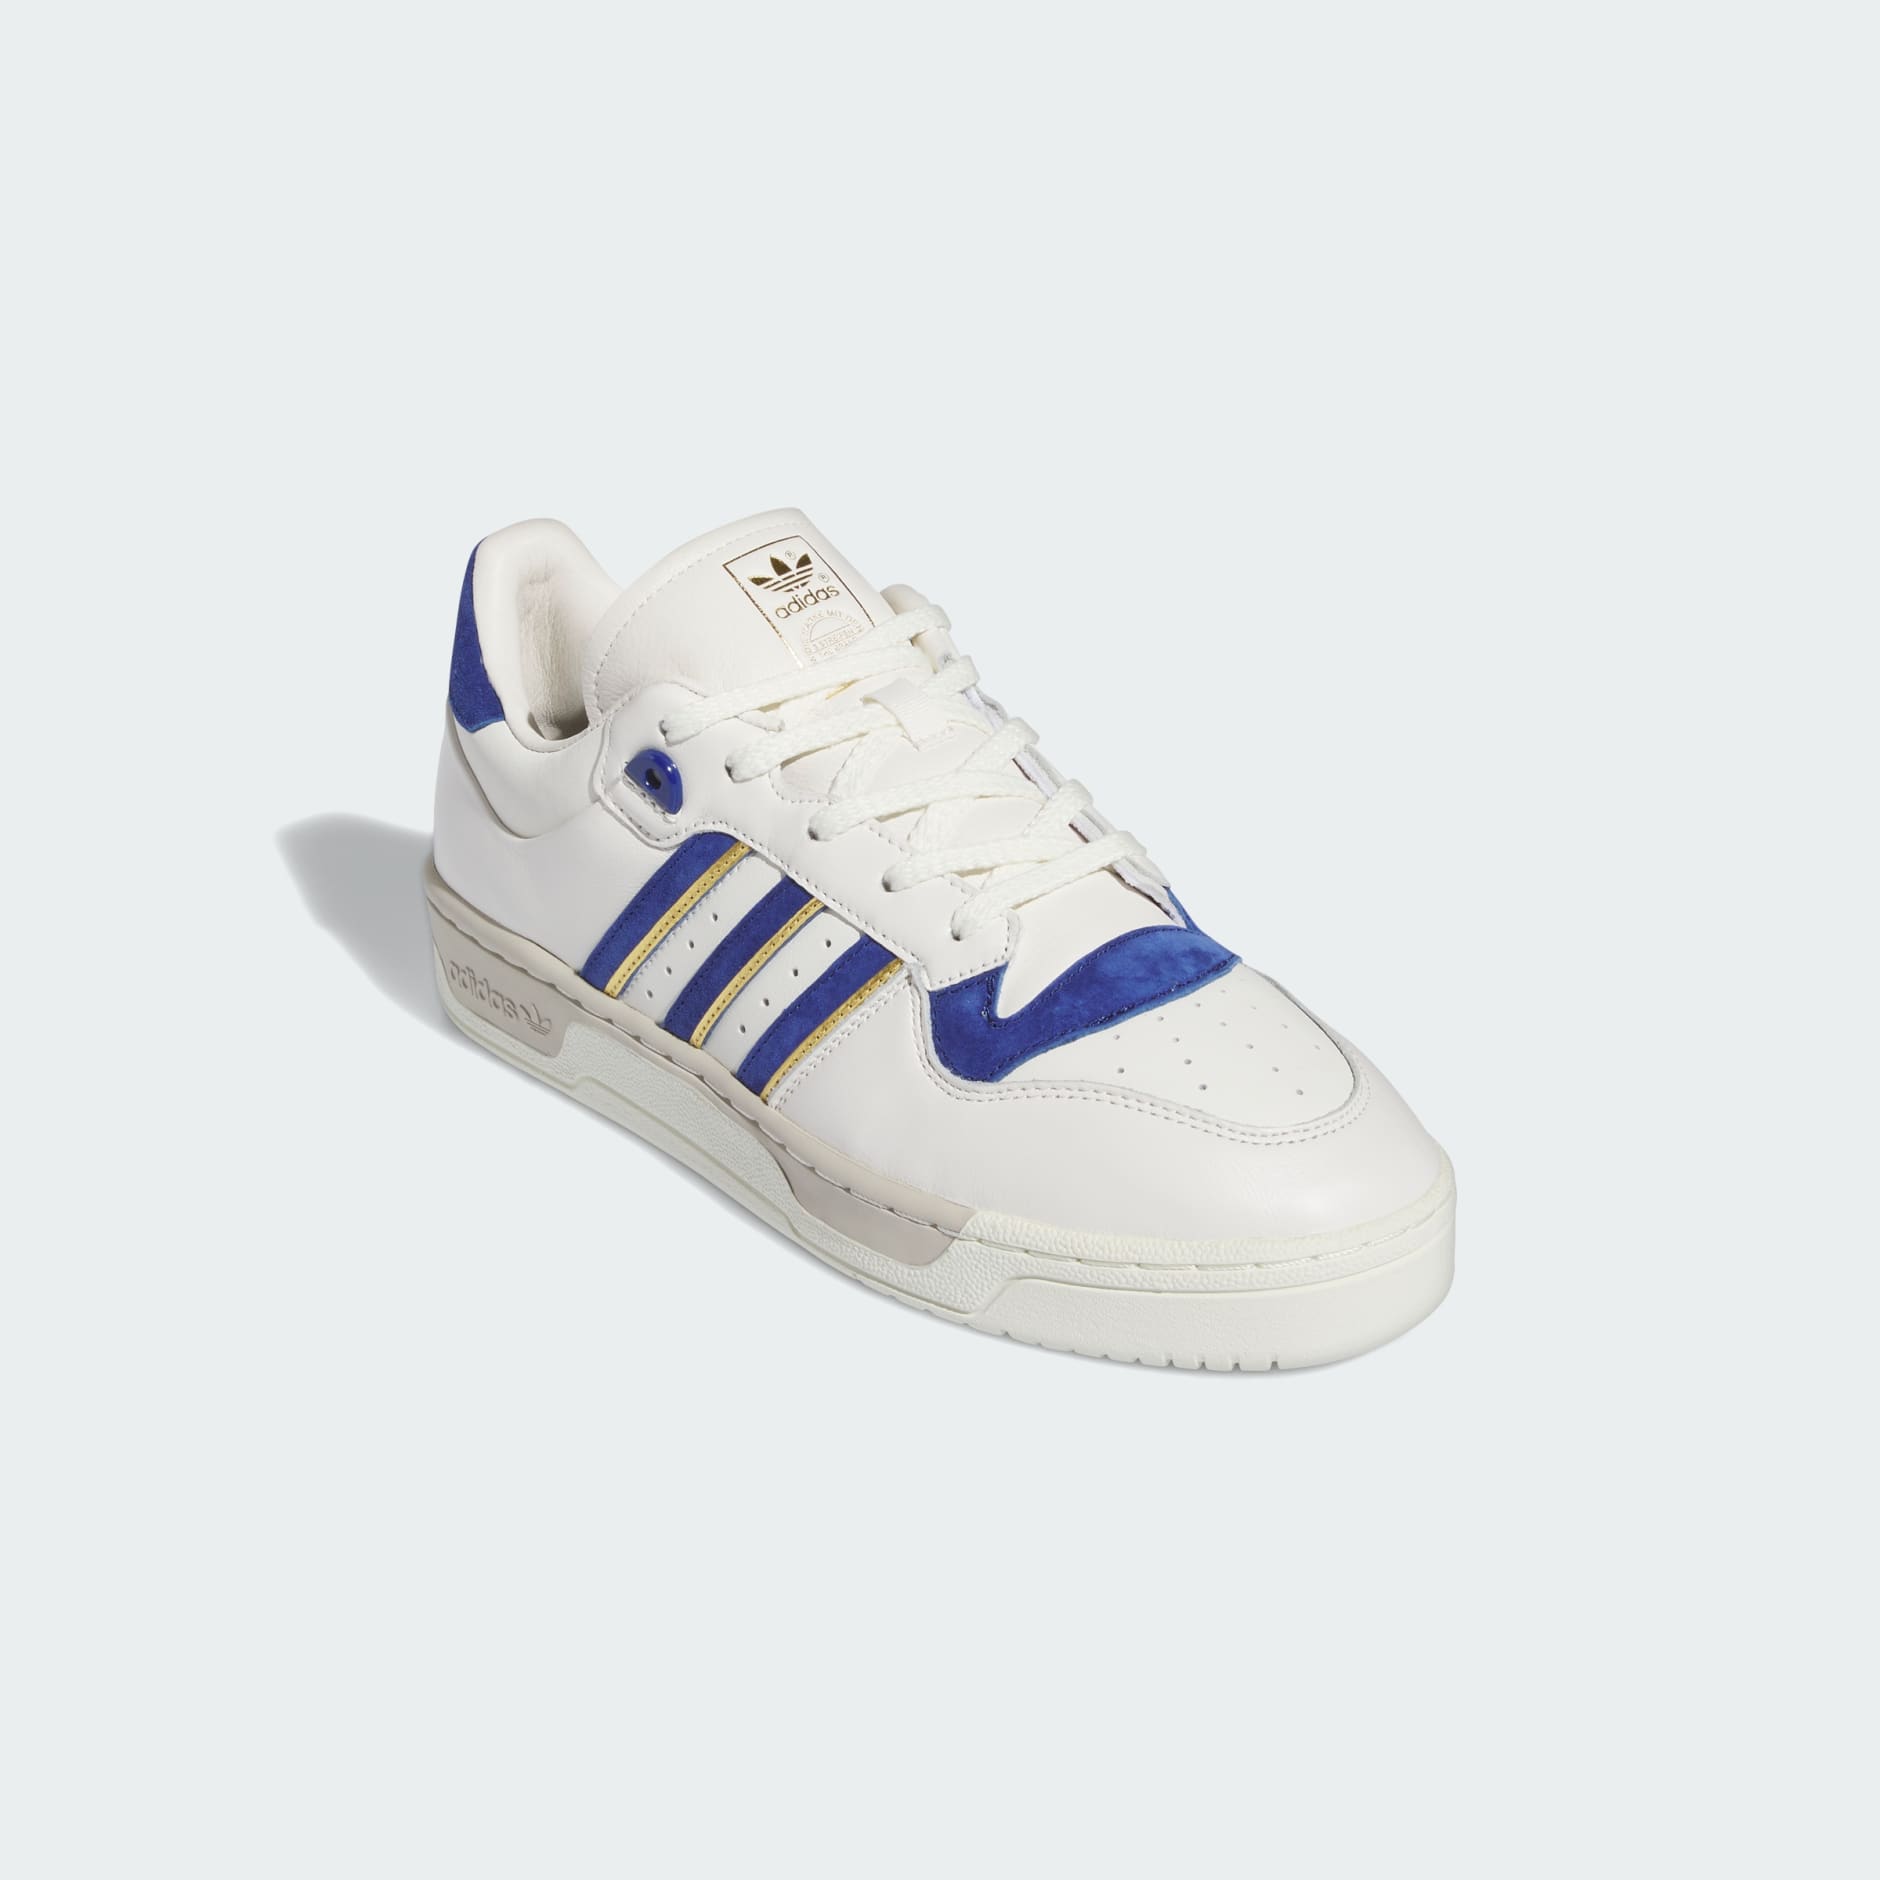 adidas Rivalry Low Cloud White Blue